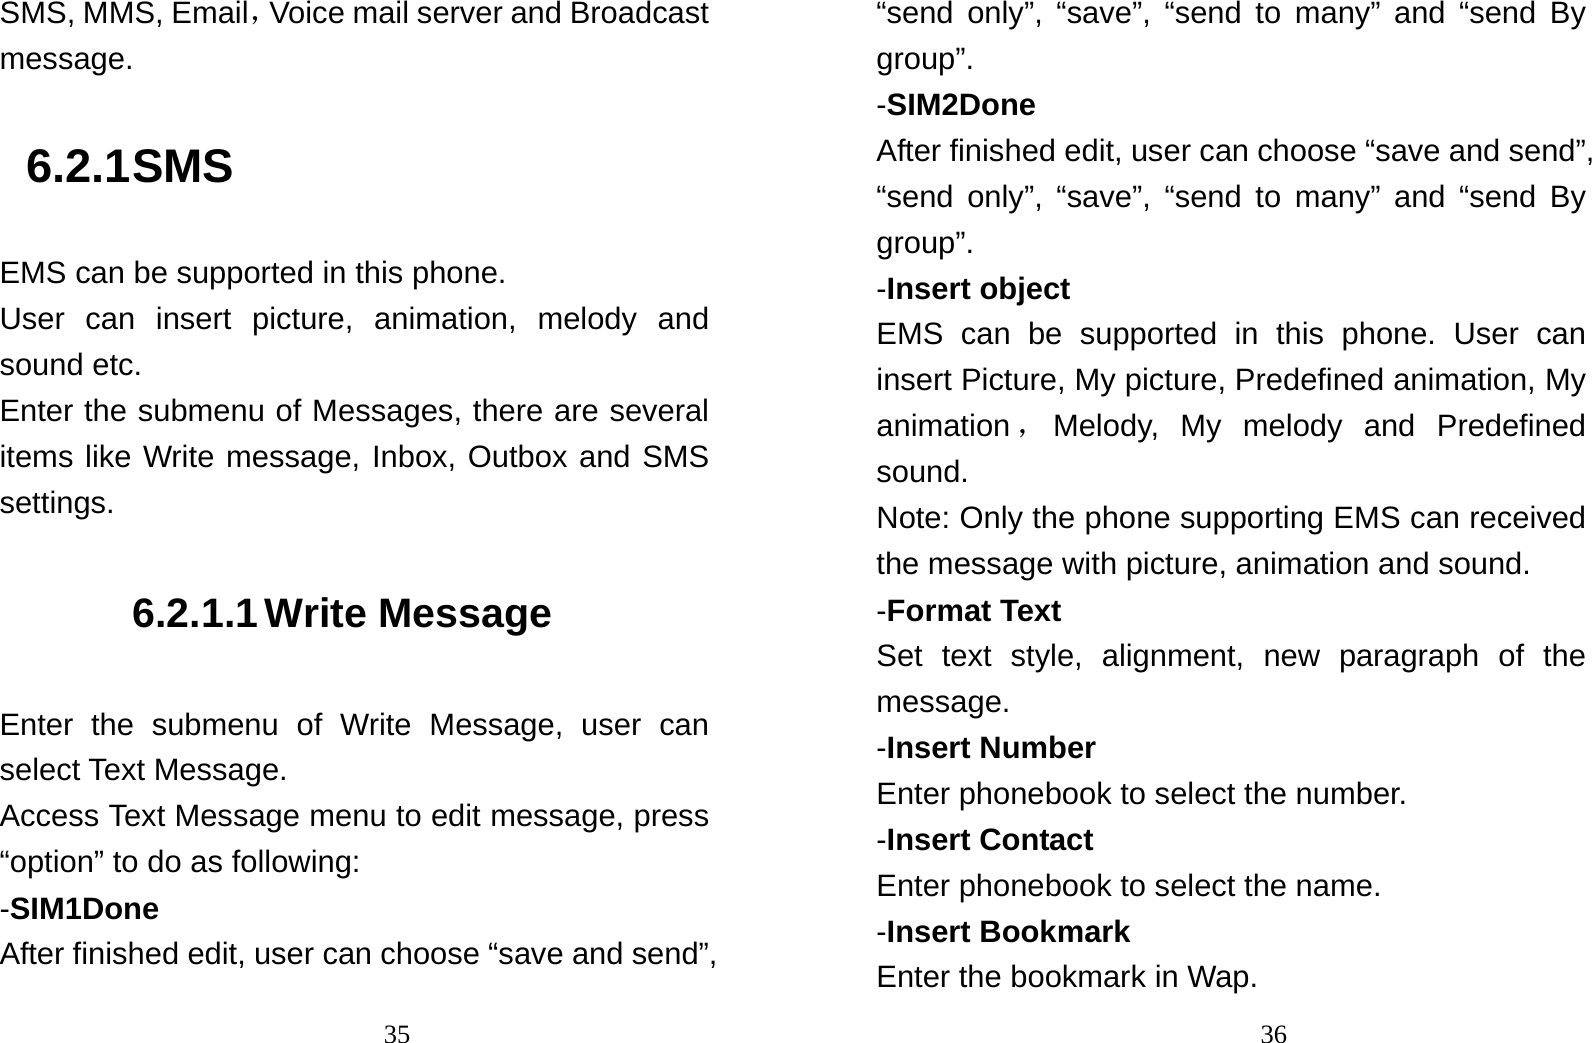                                35SMS, MMS, Email，Voice mail server and Broadcast message.  6.2.1 SMS EMS can be supported in this phone. User can insert picture, animation, melody and sound etc.   Enter the submenu of Messages, there are several items like Write message, Inbox, Outbox and SMS settings. 6.2.1.1 Write Message Enter the submenu of Write Message, user can select Text Message. Access Text Message menu to edit message, press “option” to do as following: -SIM1Done After finished edit, user can choose “save and send”,                                36“send only”, “save”, “send to many” and “send By group”.  -SIM2Done After finished edit, user can choose “save and send”, “send only”, “save”, “send to many” and “send By group”.  -Insert object EMS can be supported in this phone. User can insert Picture, My picture, Predefined animation, My animation ，Melody, My melody and Predefined sound. Note: Only the phone supporting EMS can received the message with picture, animation and sound. -Format Text Set text style, alignment, new paragraph of the message. -Insert Number Enter phonebook to select the number. -Insert Contact   Enter phonebook to select the name. -Insert Bookmark Enter the bookmark in Wap. 